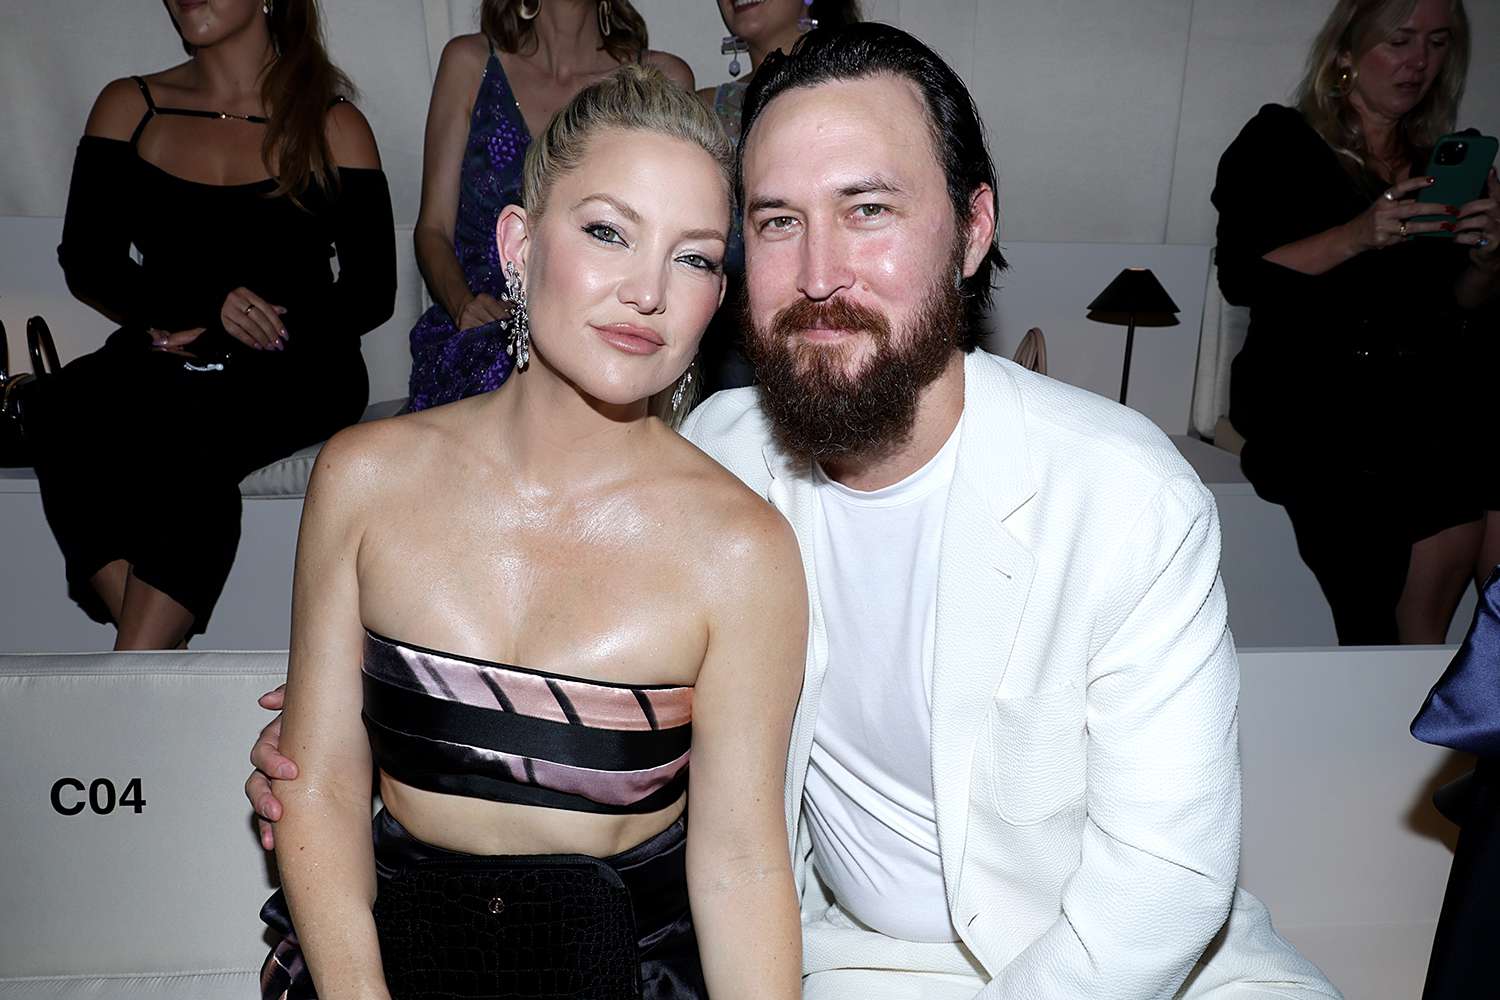 Why Kate Hudson Says Being an Aries with 'Butterfly Feet' Makes Her and Gemini Fiancé Perfect Coworkers (Exclusive)